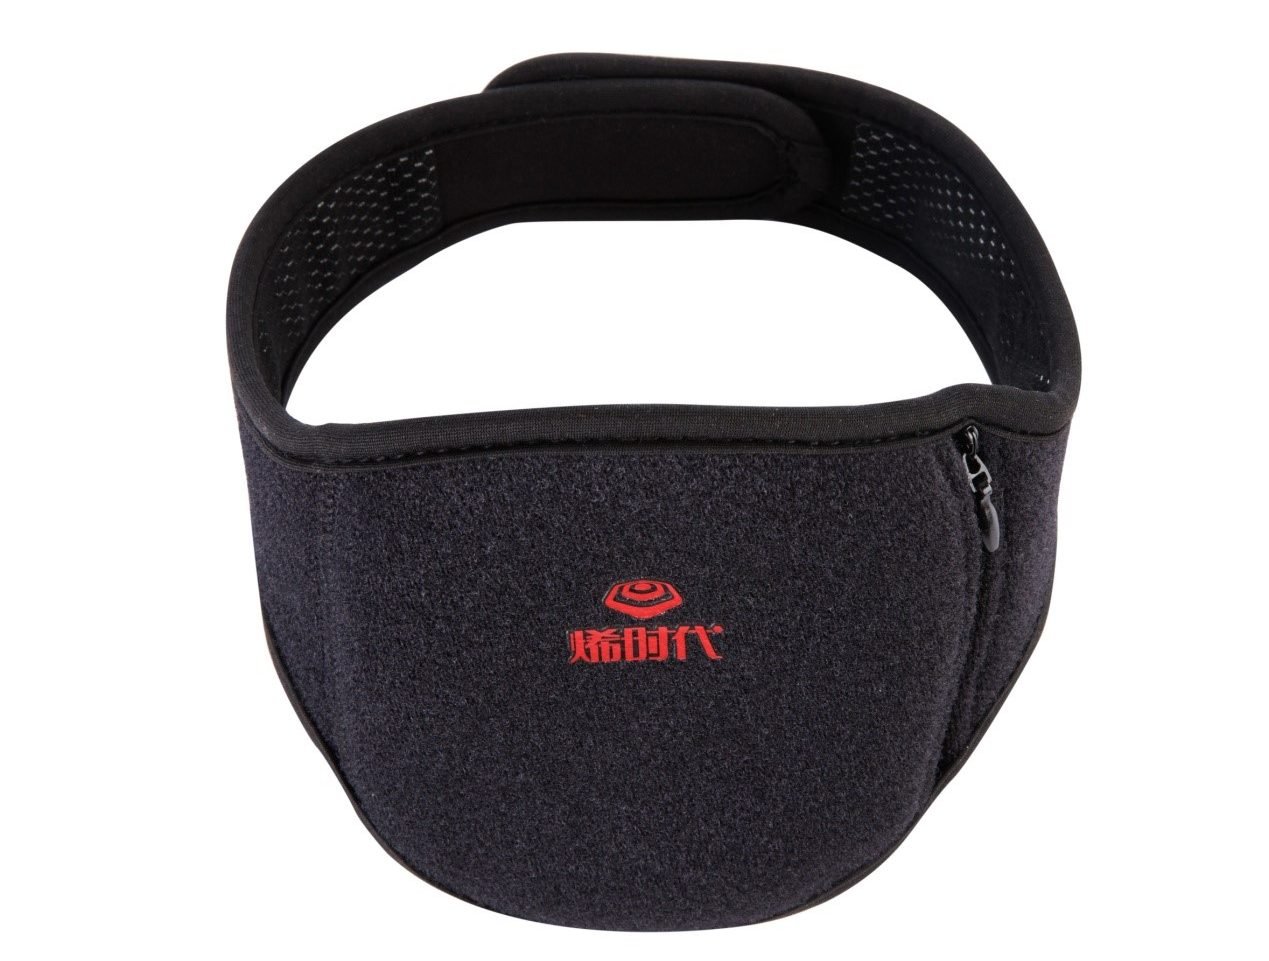 Graphene Heated Neck Wrap - Features